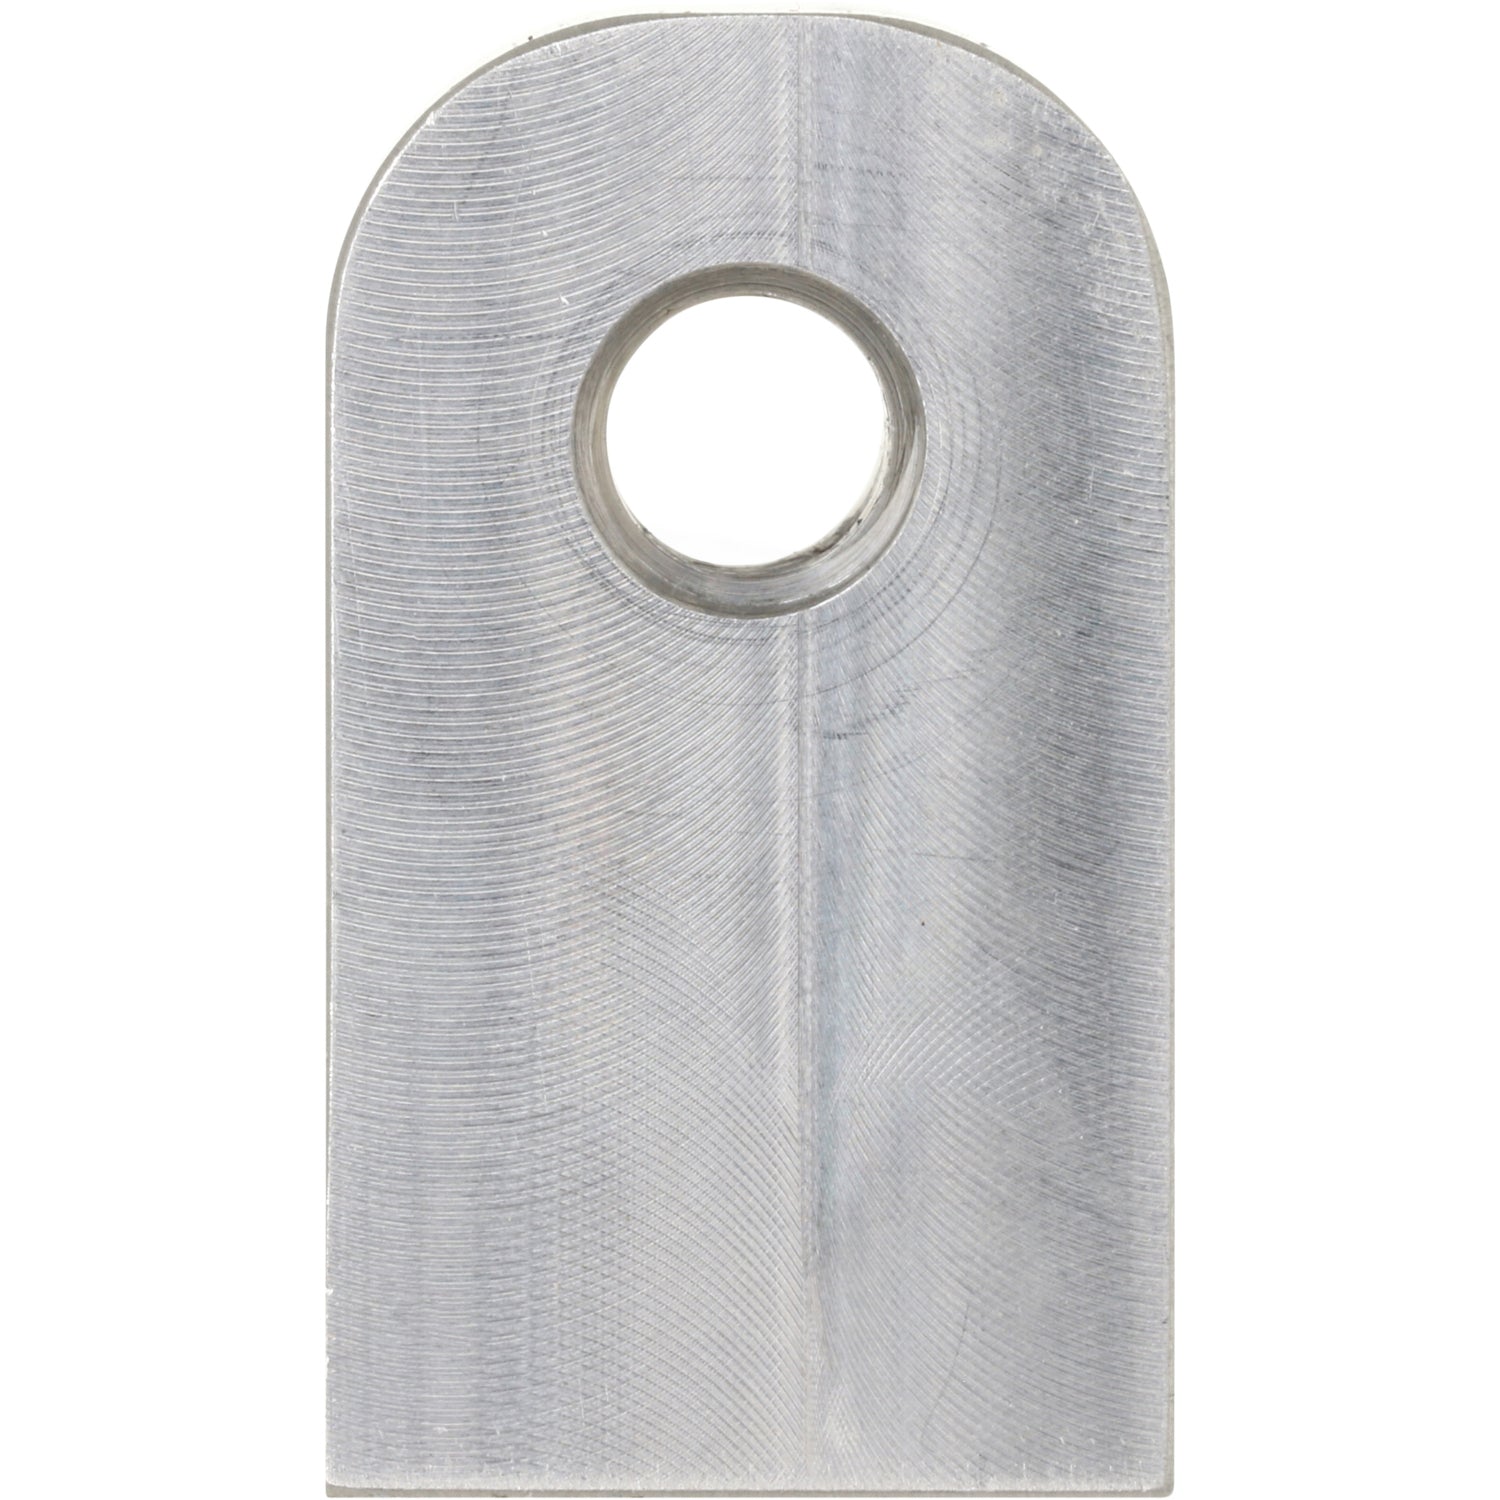 Stainless Steel Rectangular block with one rounded end and a threaded hole shown on white background. 